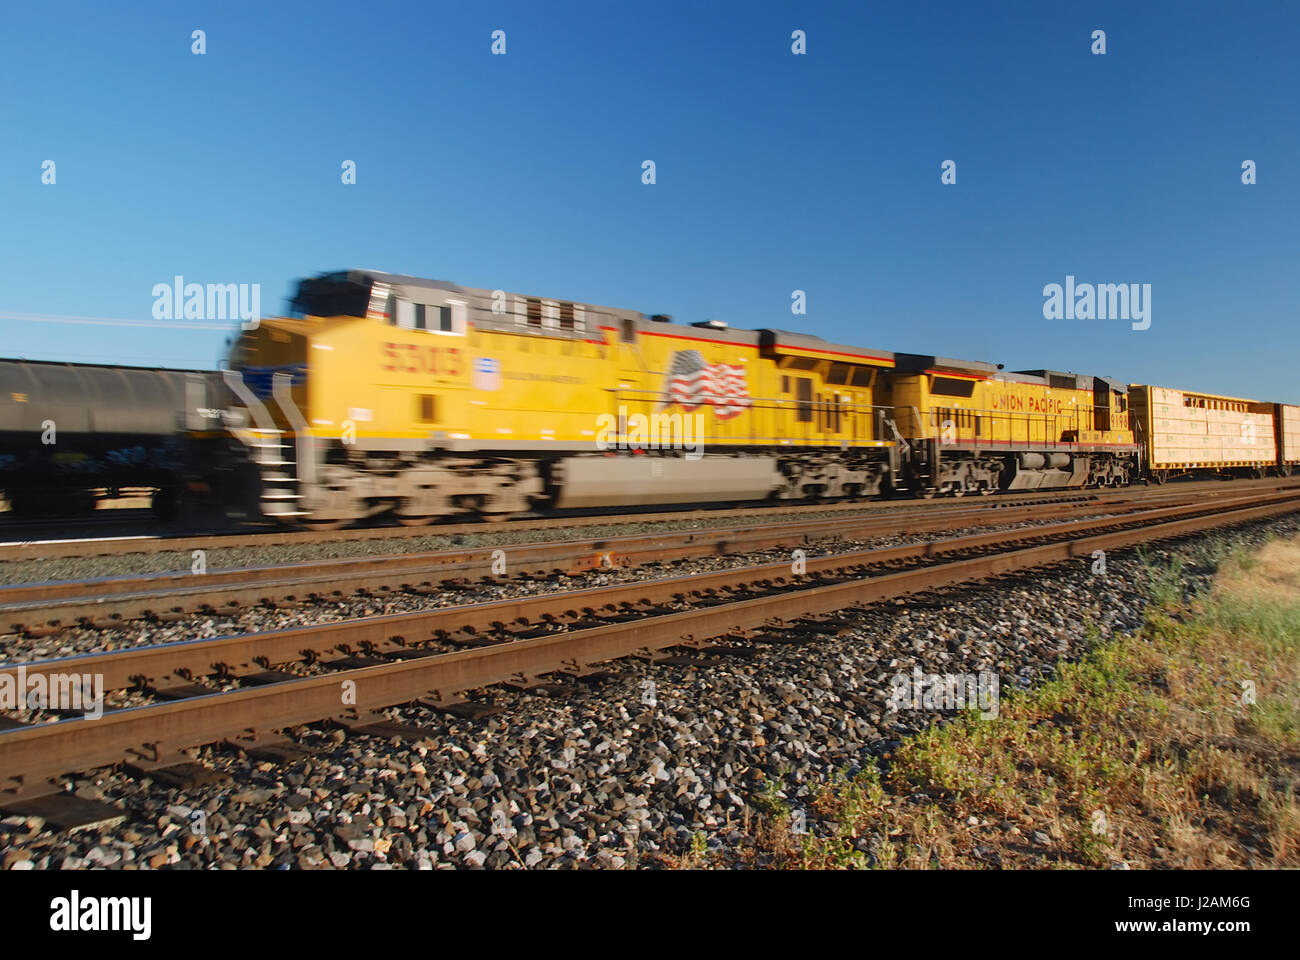 Union Pacific freight train at Roseville, Placer County, California, USA Stock Photo